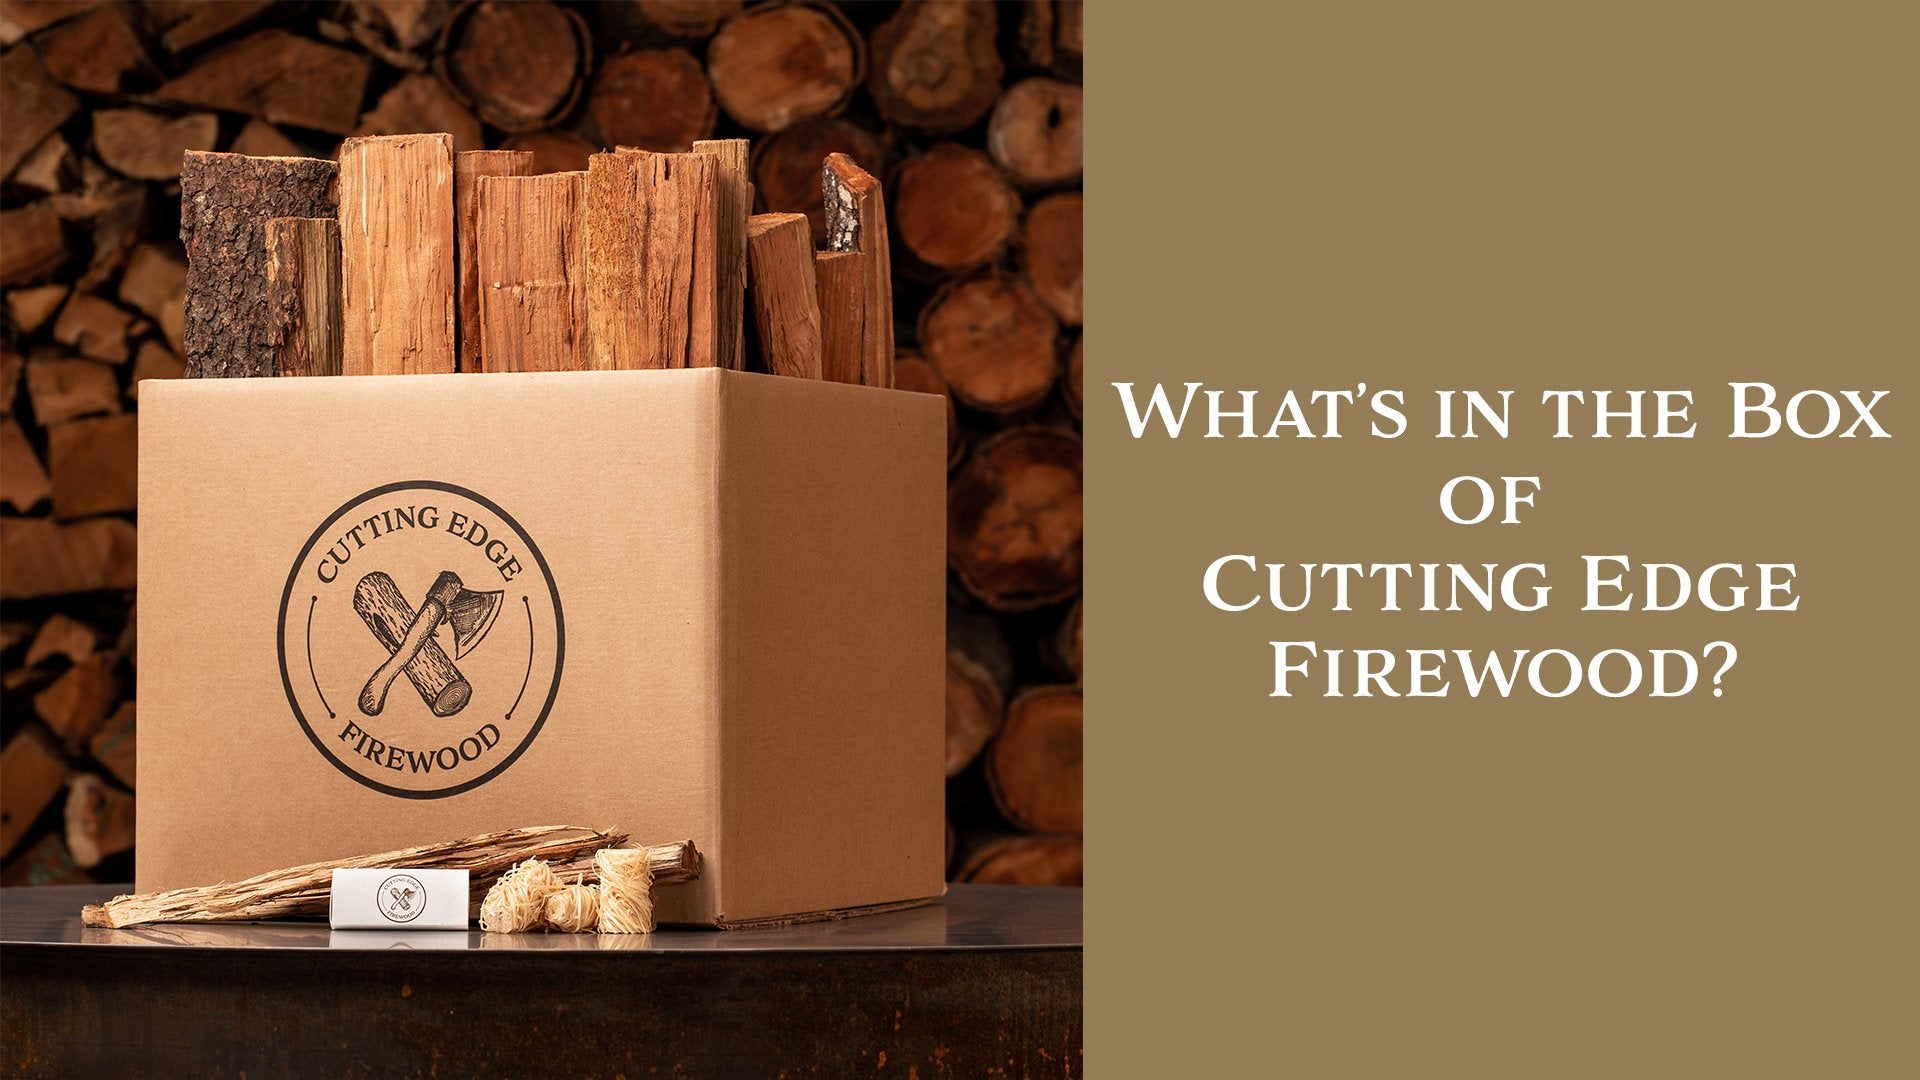 What's in the Box of Cuttig Edge Firewood